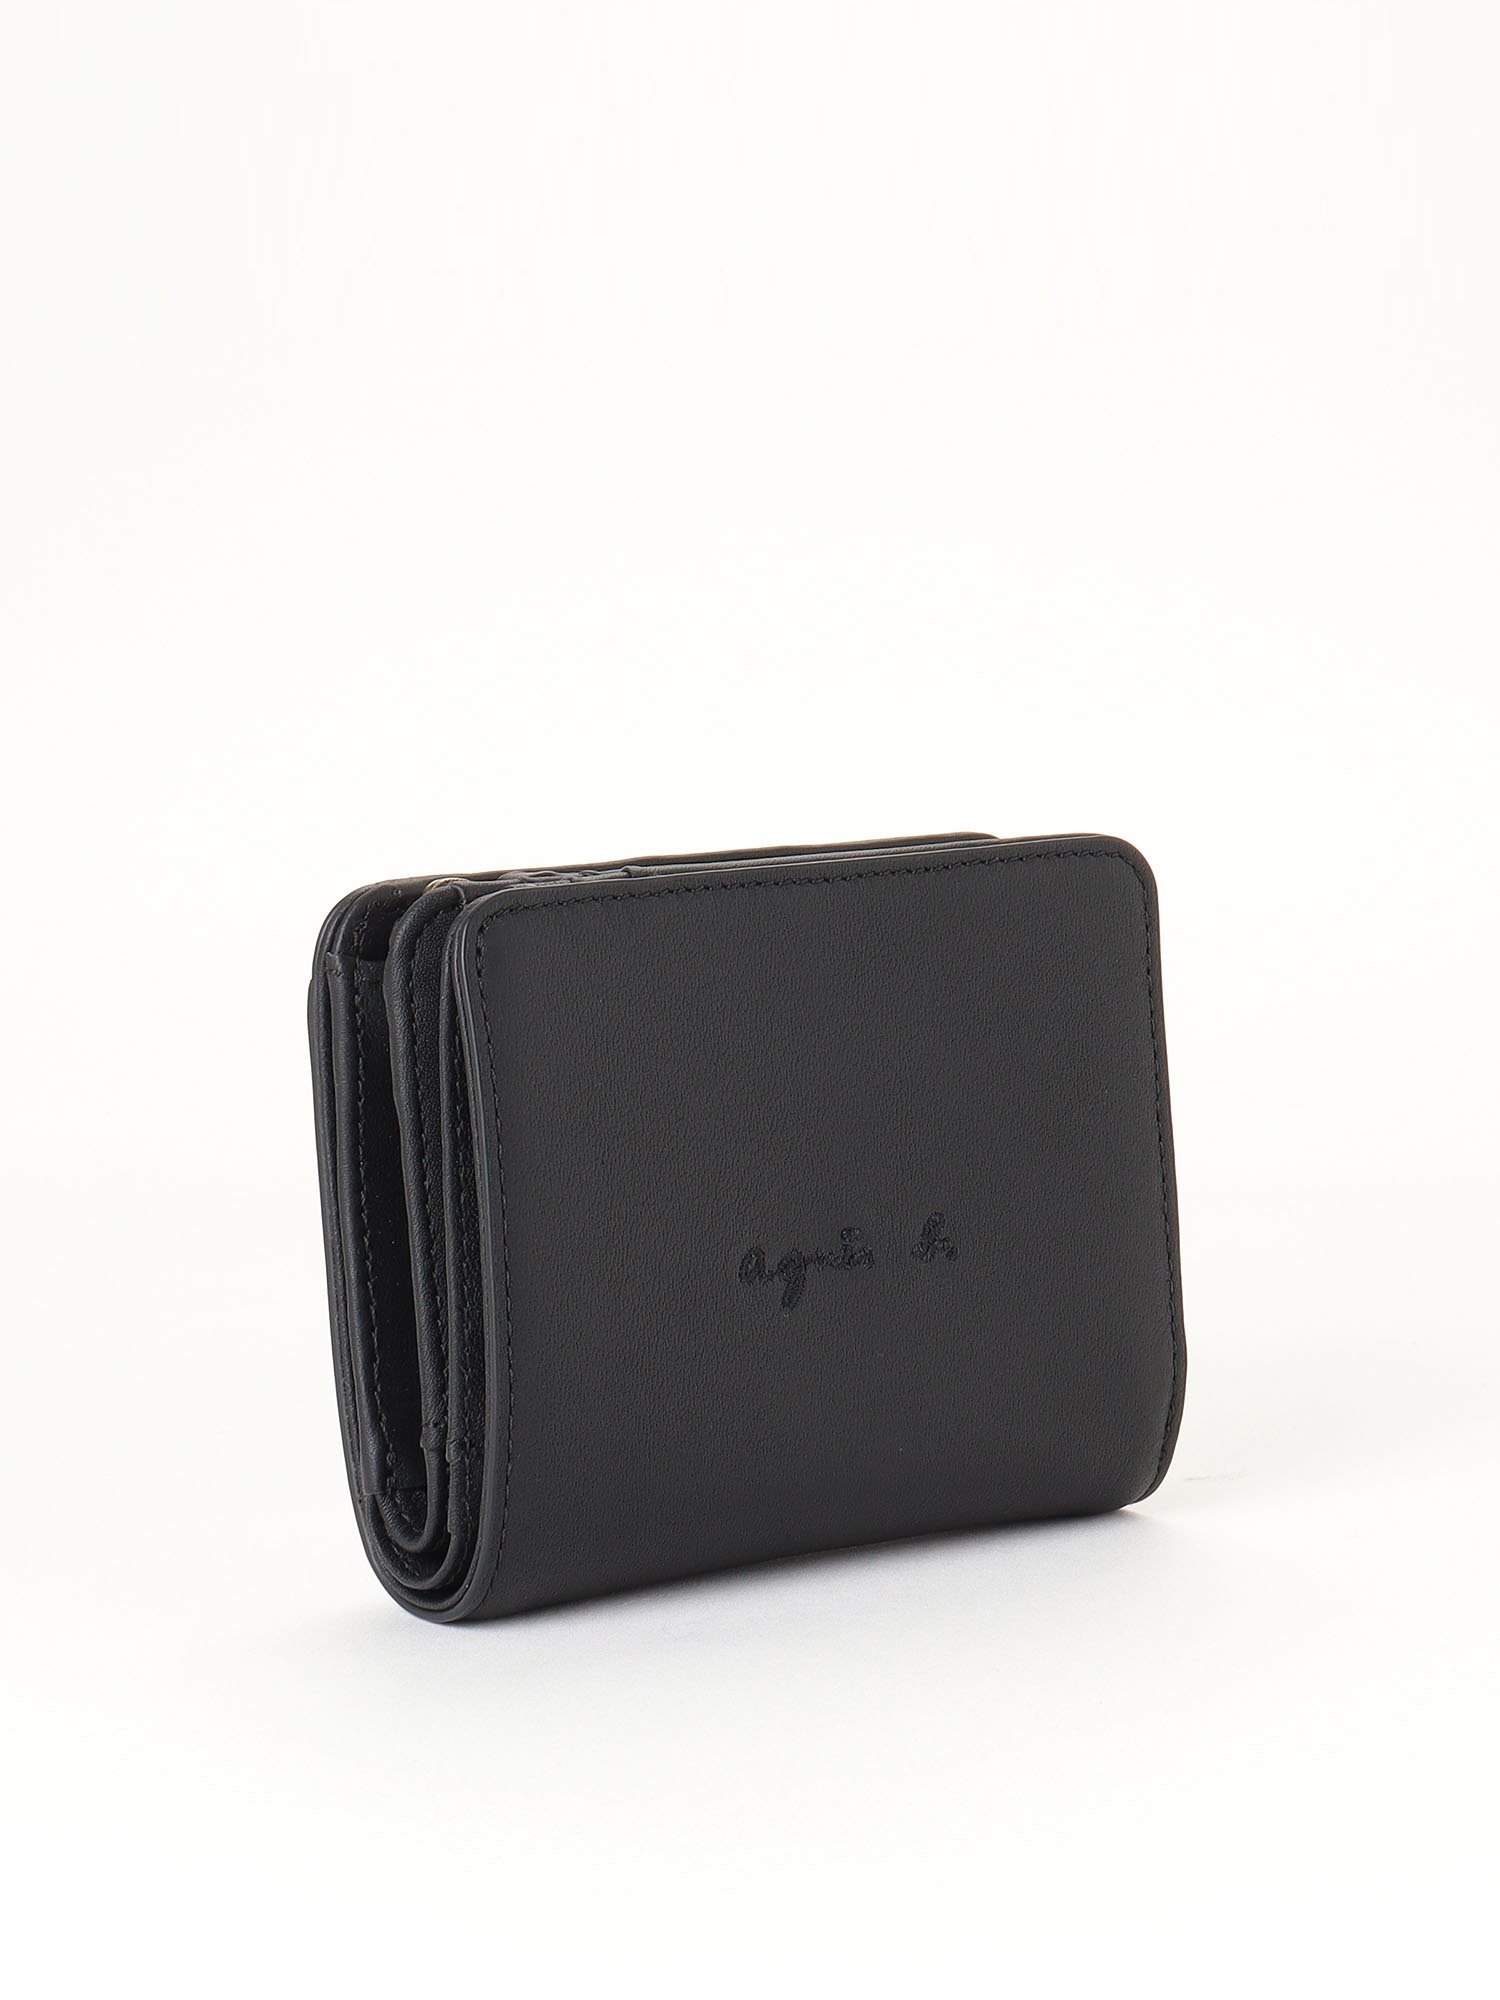 Leather Zip Coin Wallets, Free Shipping